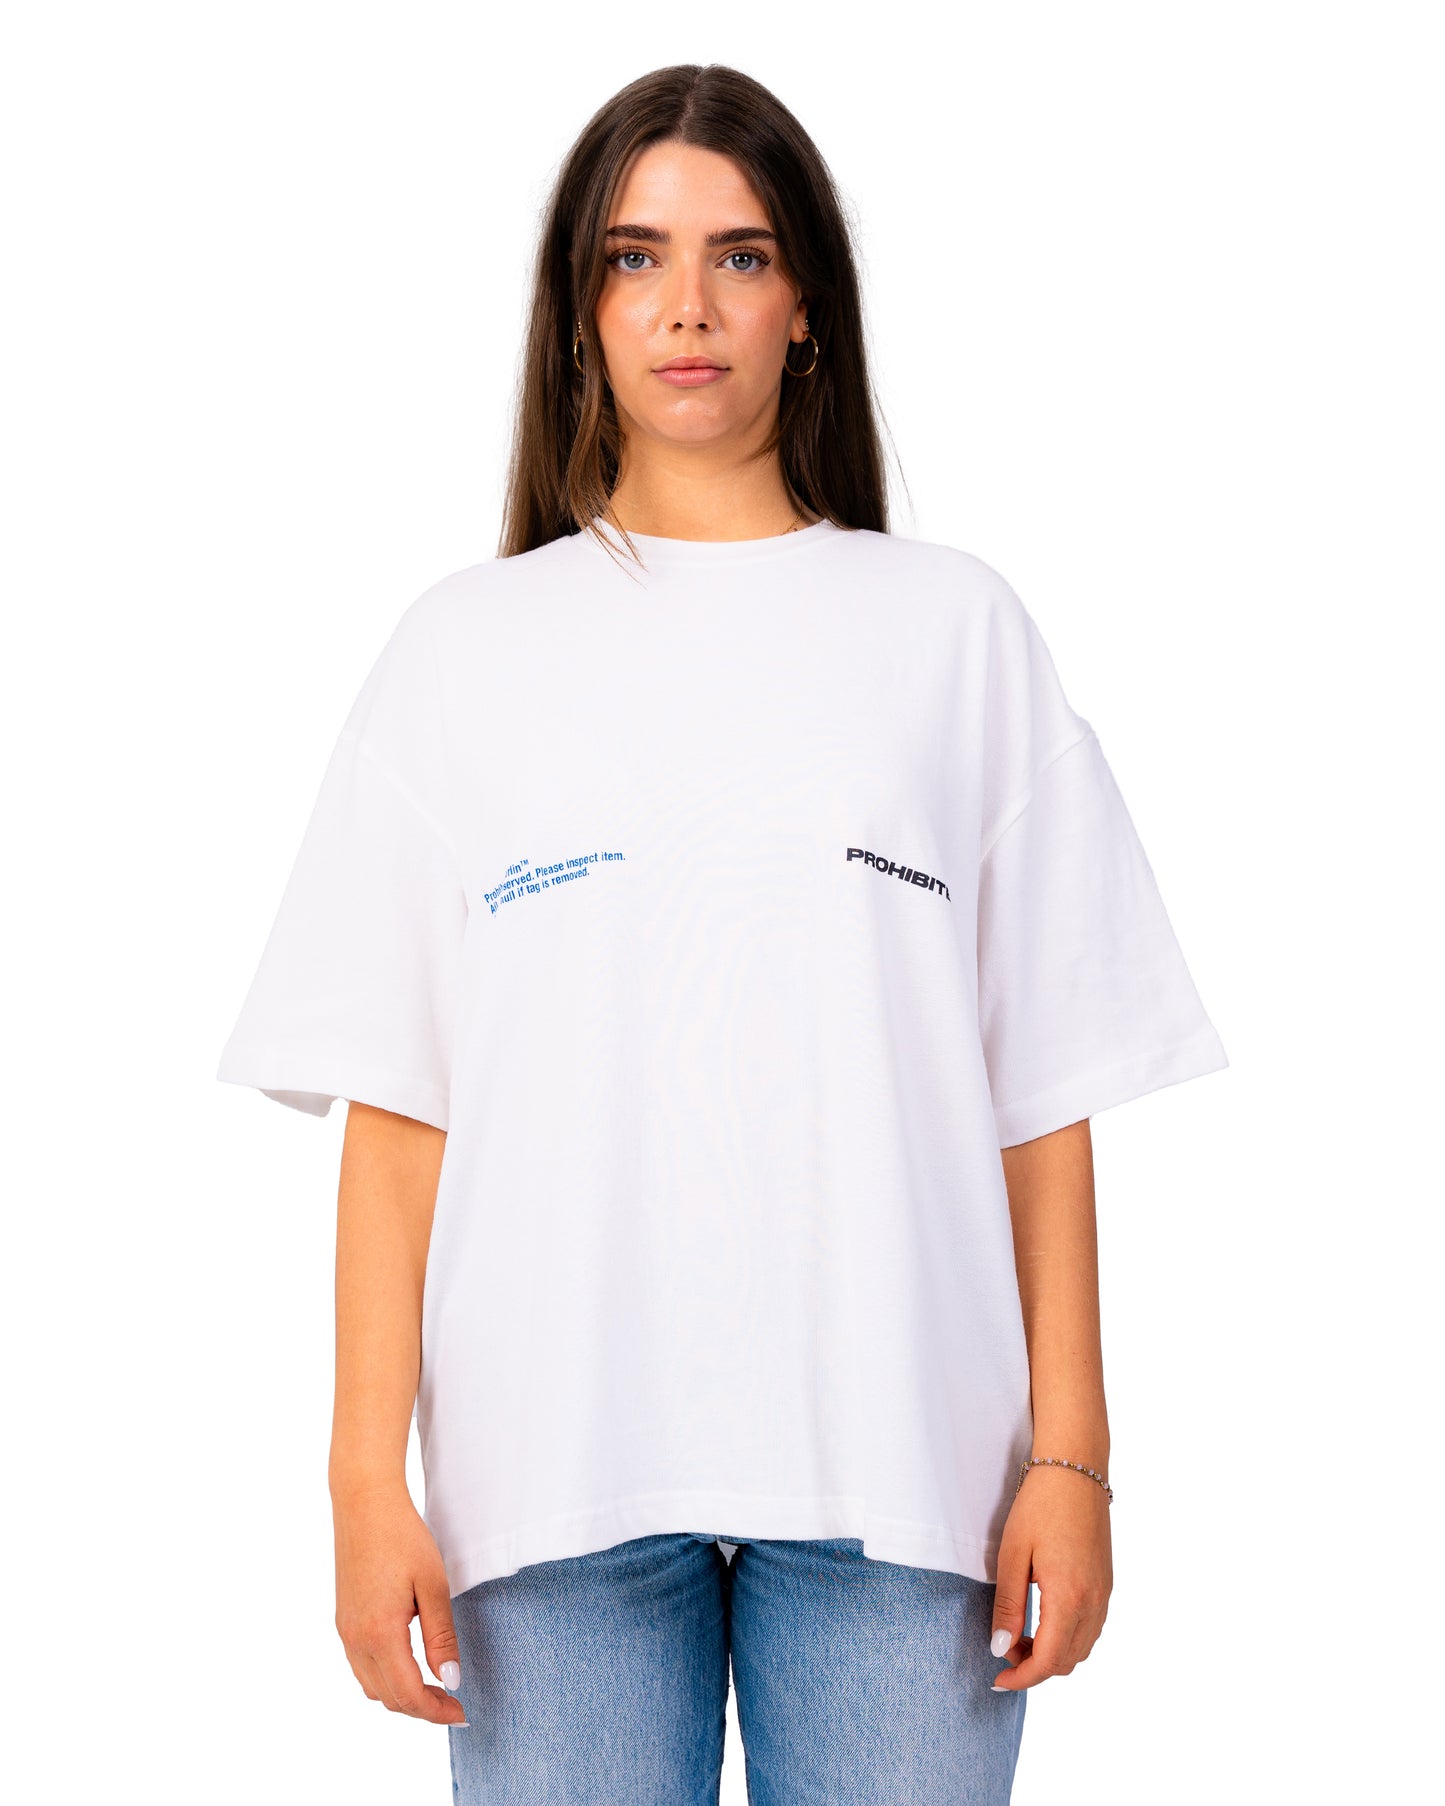 Prohibited Abstract Tee White